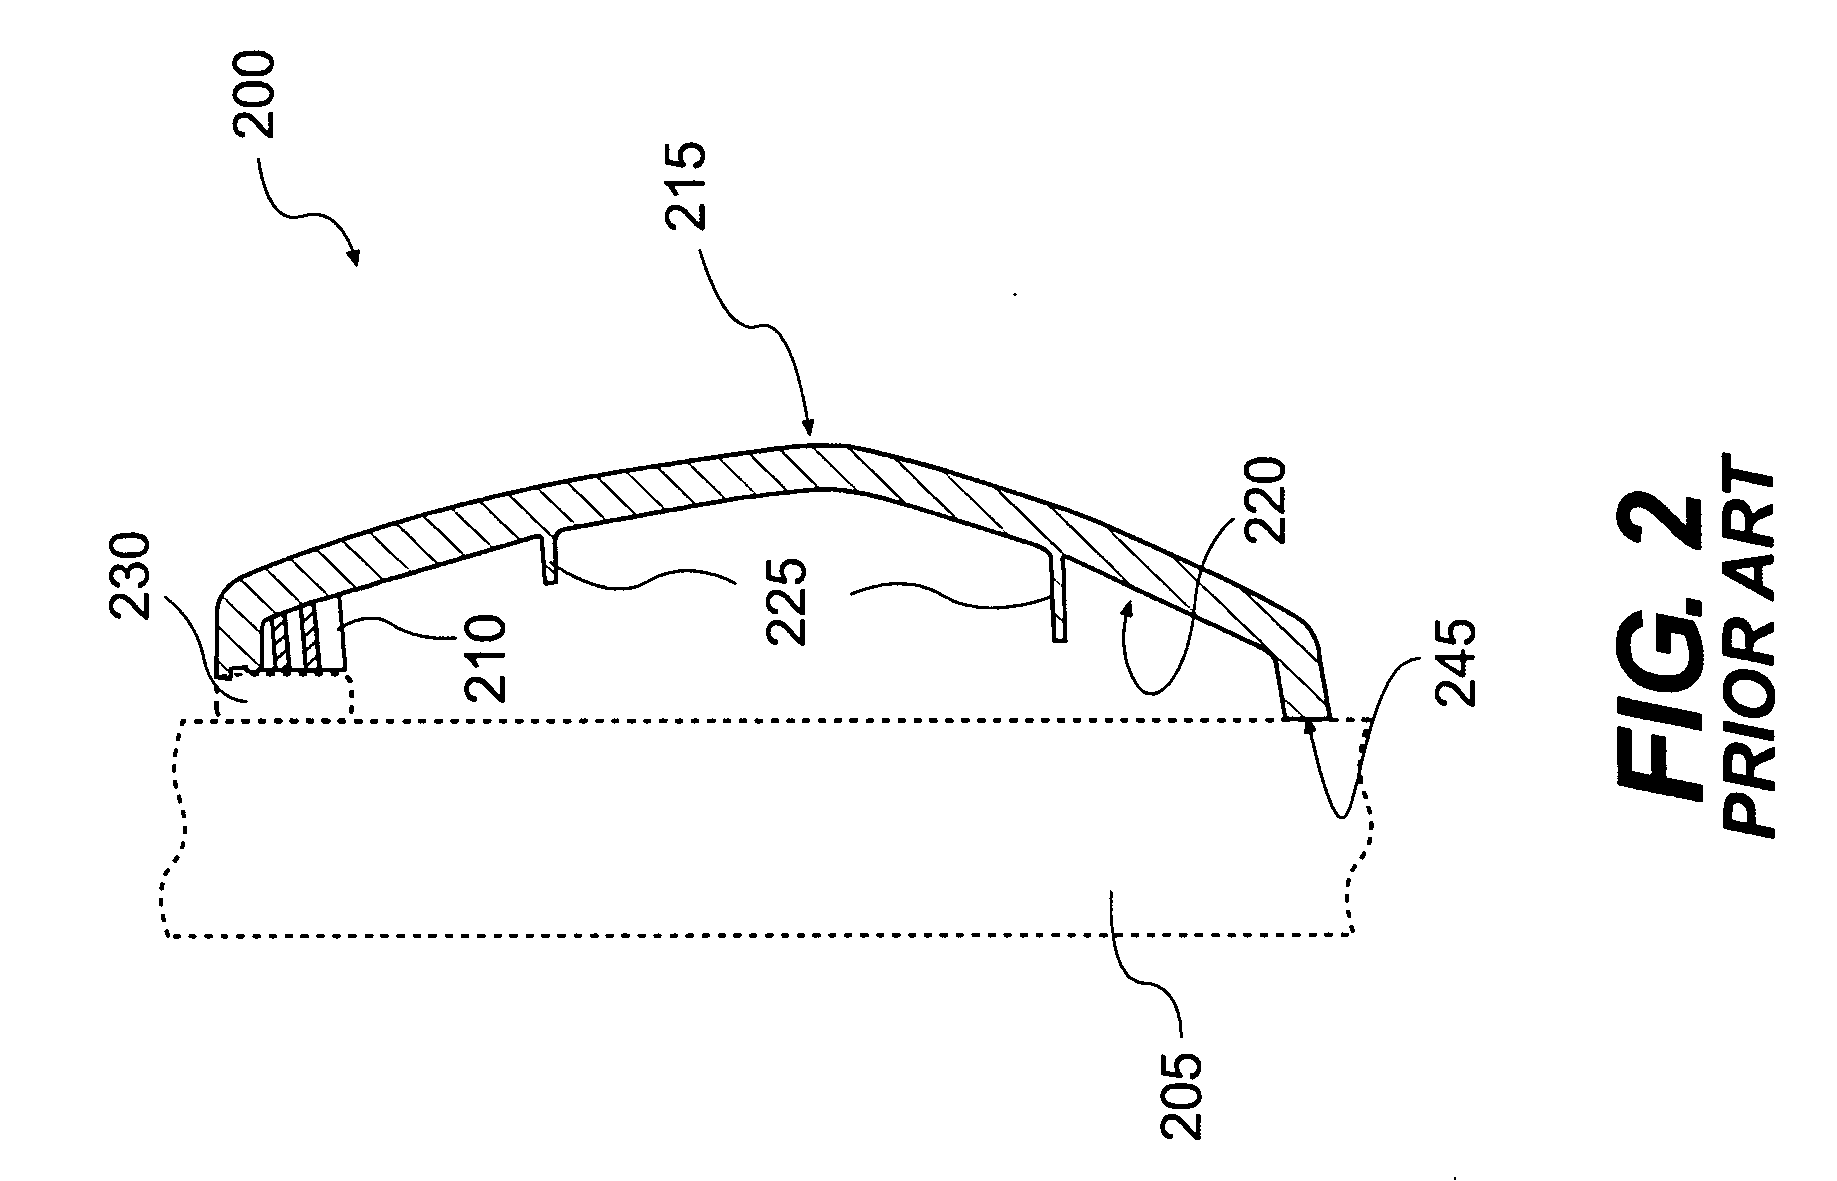 Injection molded parts for vehicles and other devices